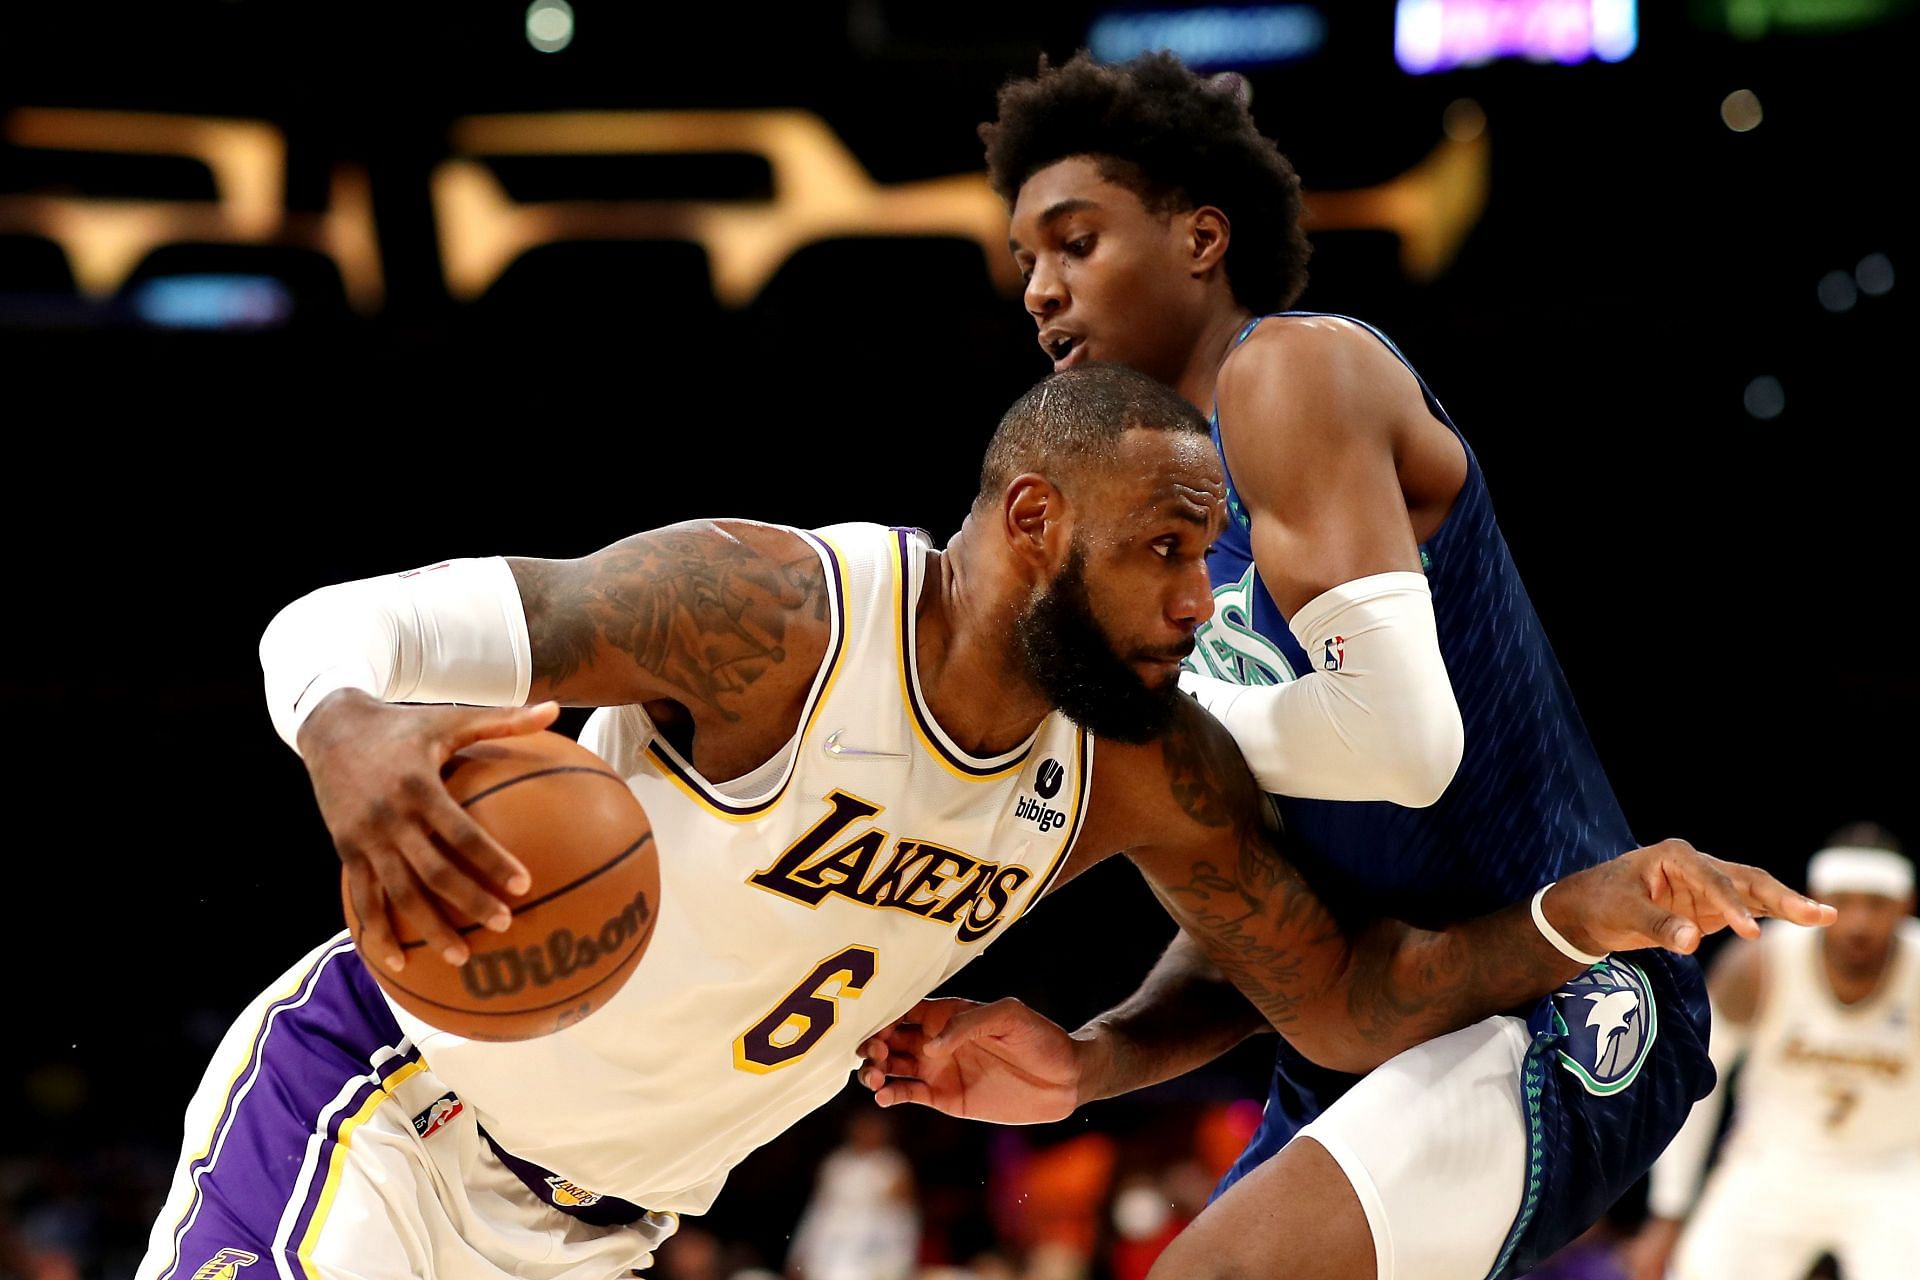 LeBron James put up 26 points to guide the LA Lakers to a 108-103 win versus Minnesota Timberwolves